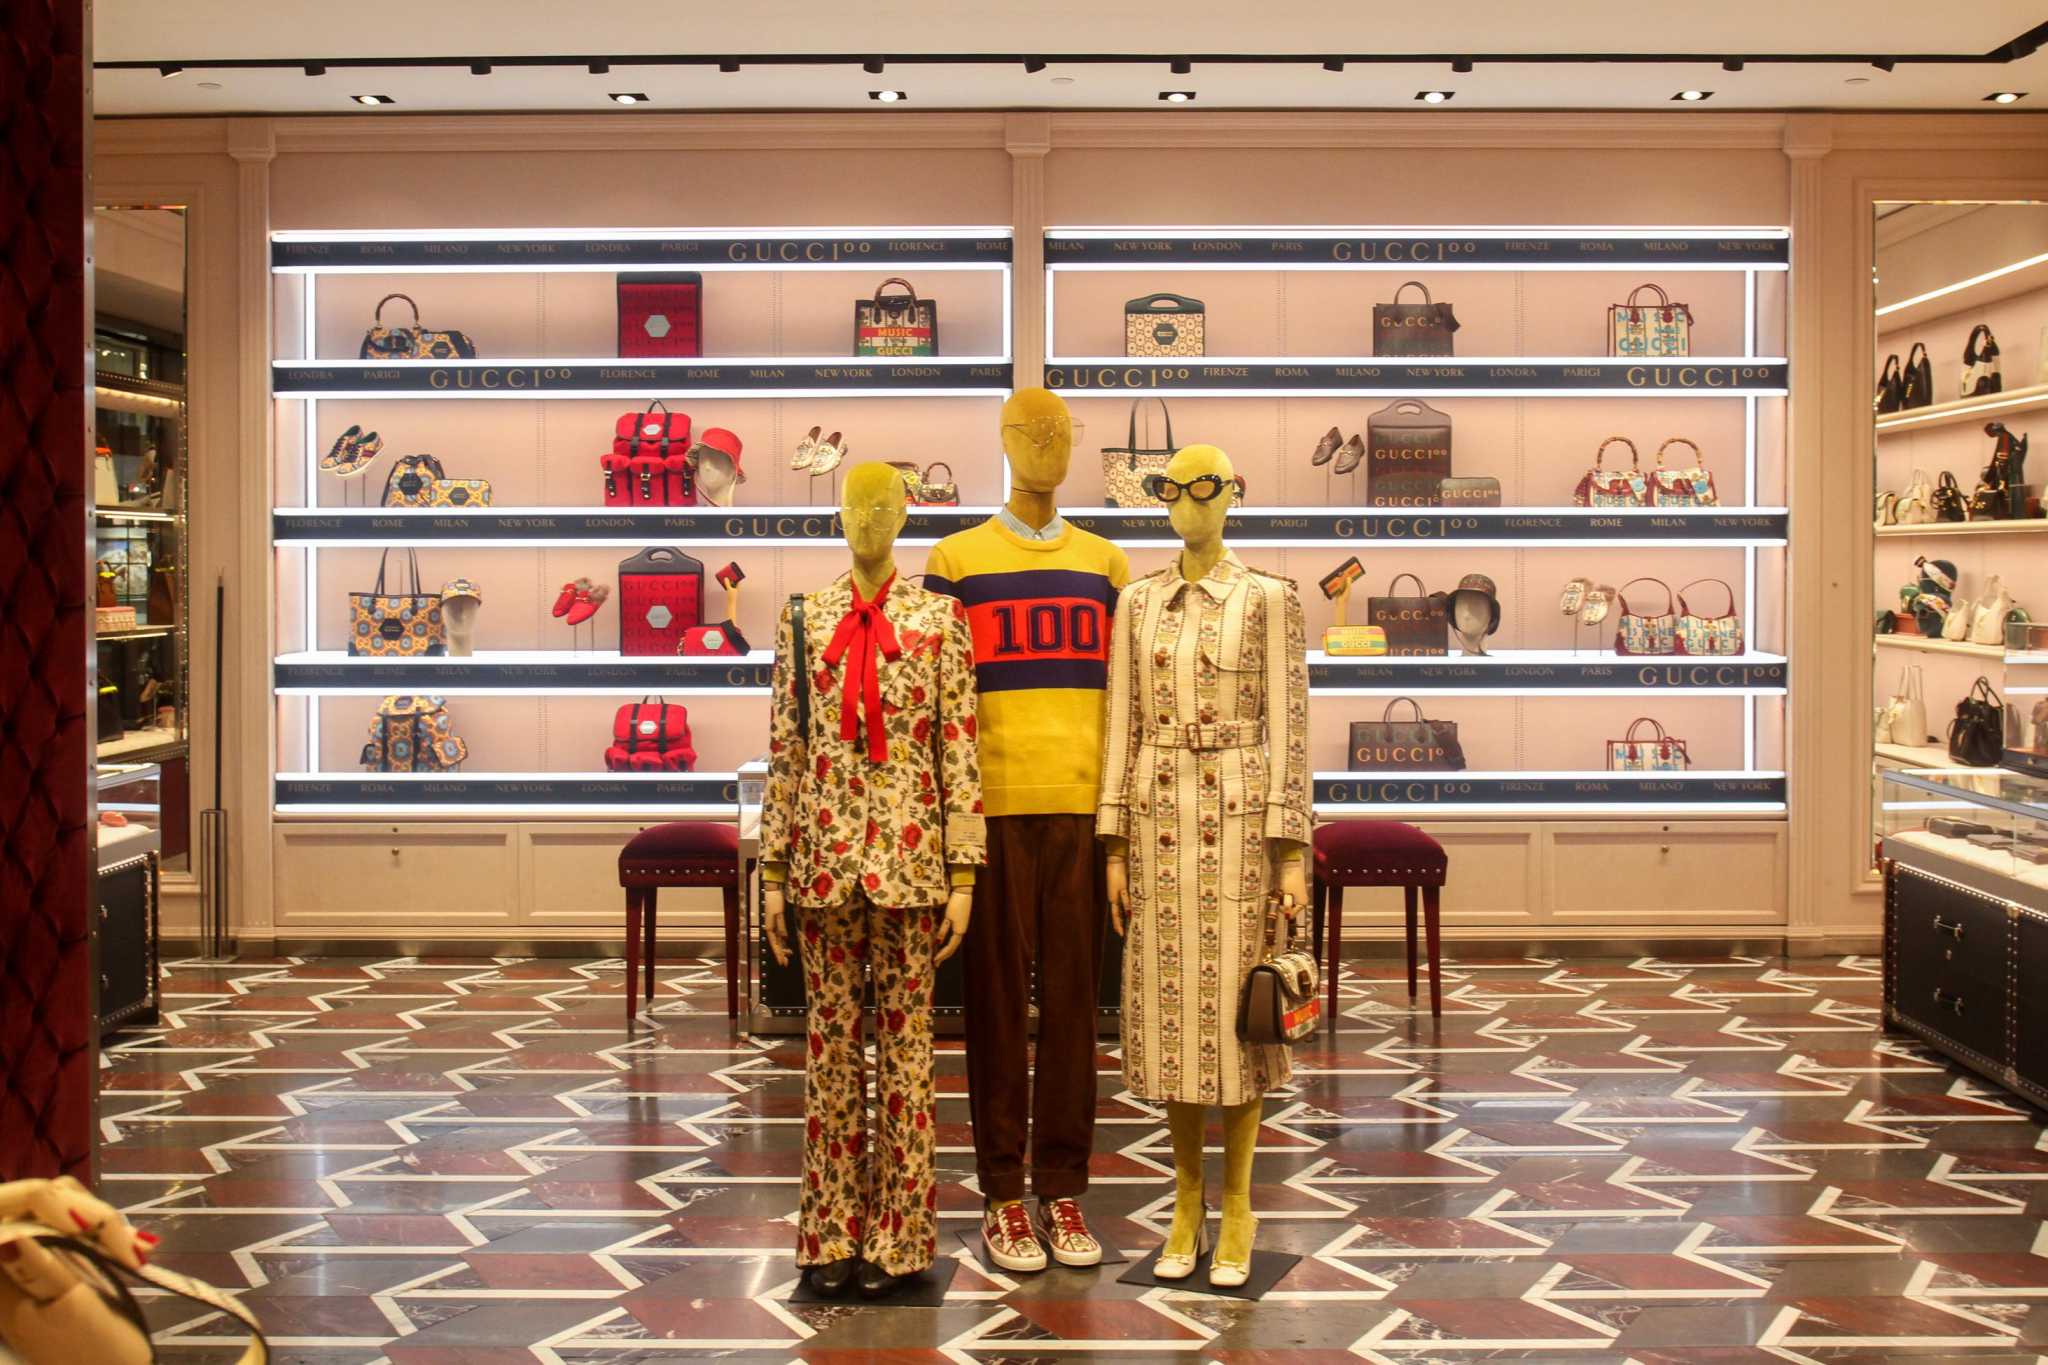 Go inside Gucci's reopened storefront at International Plaza